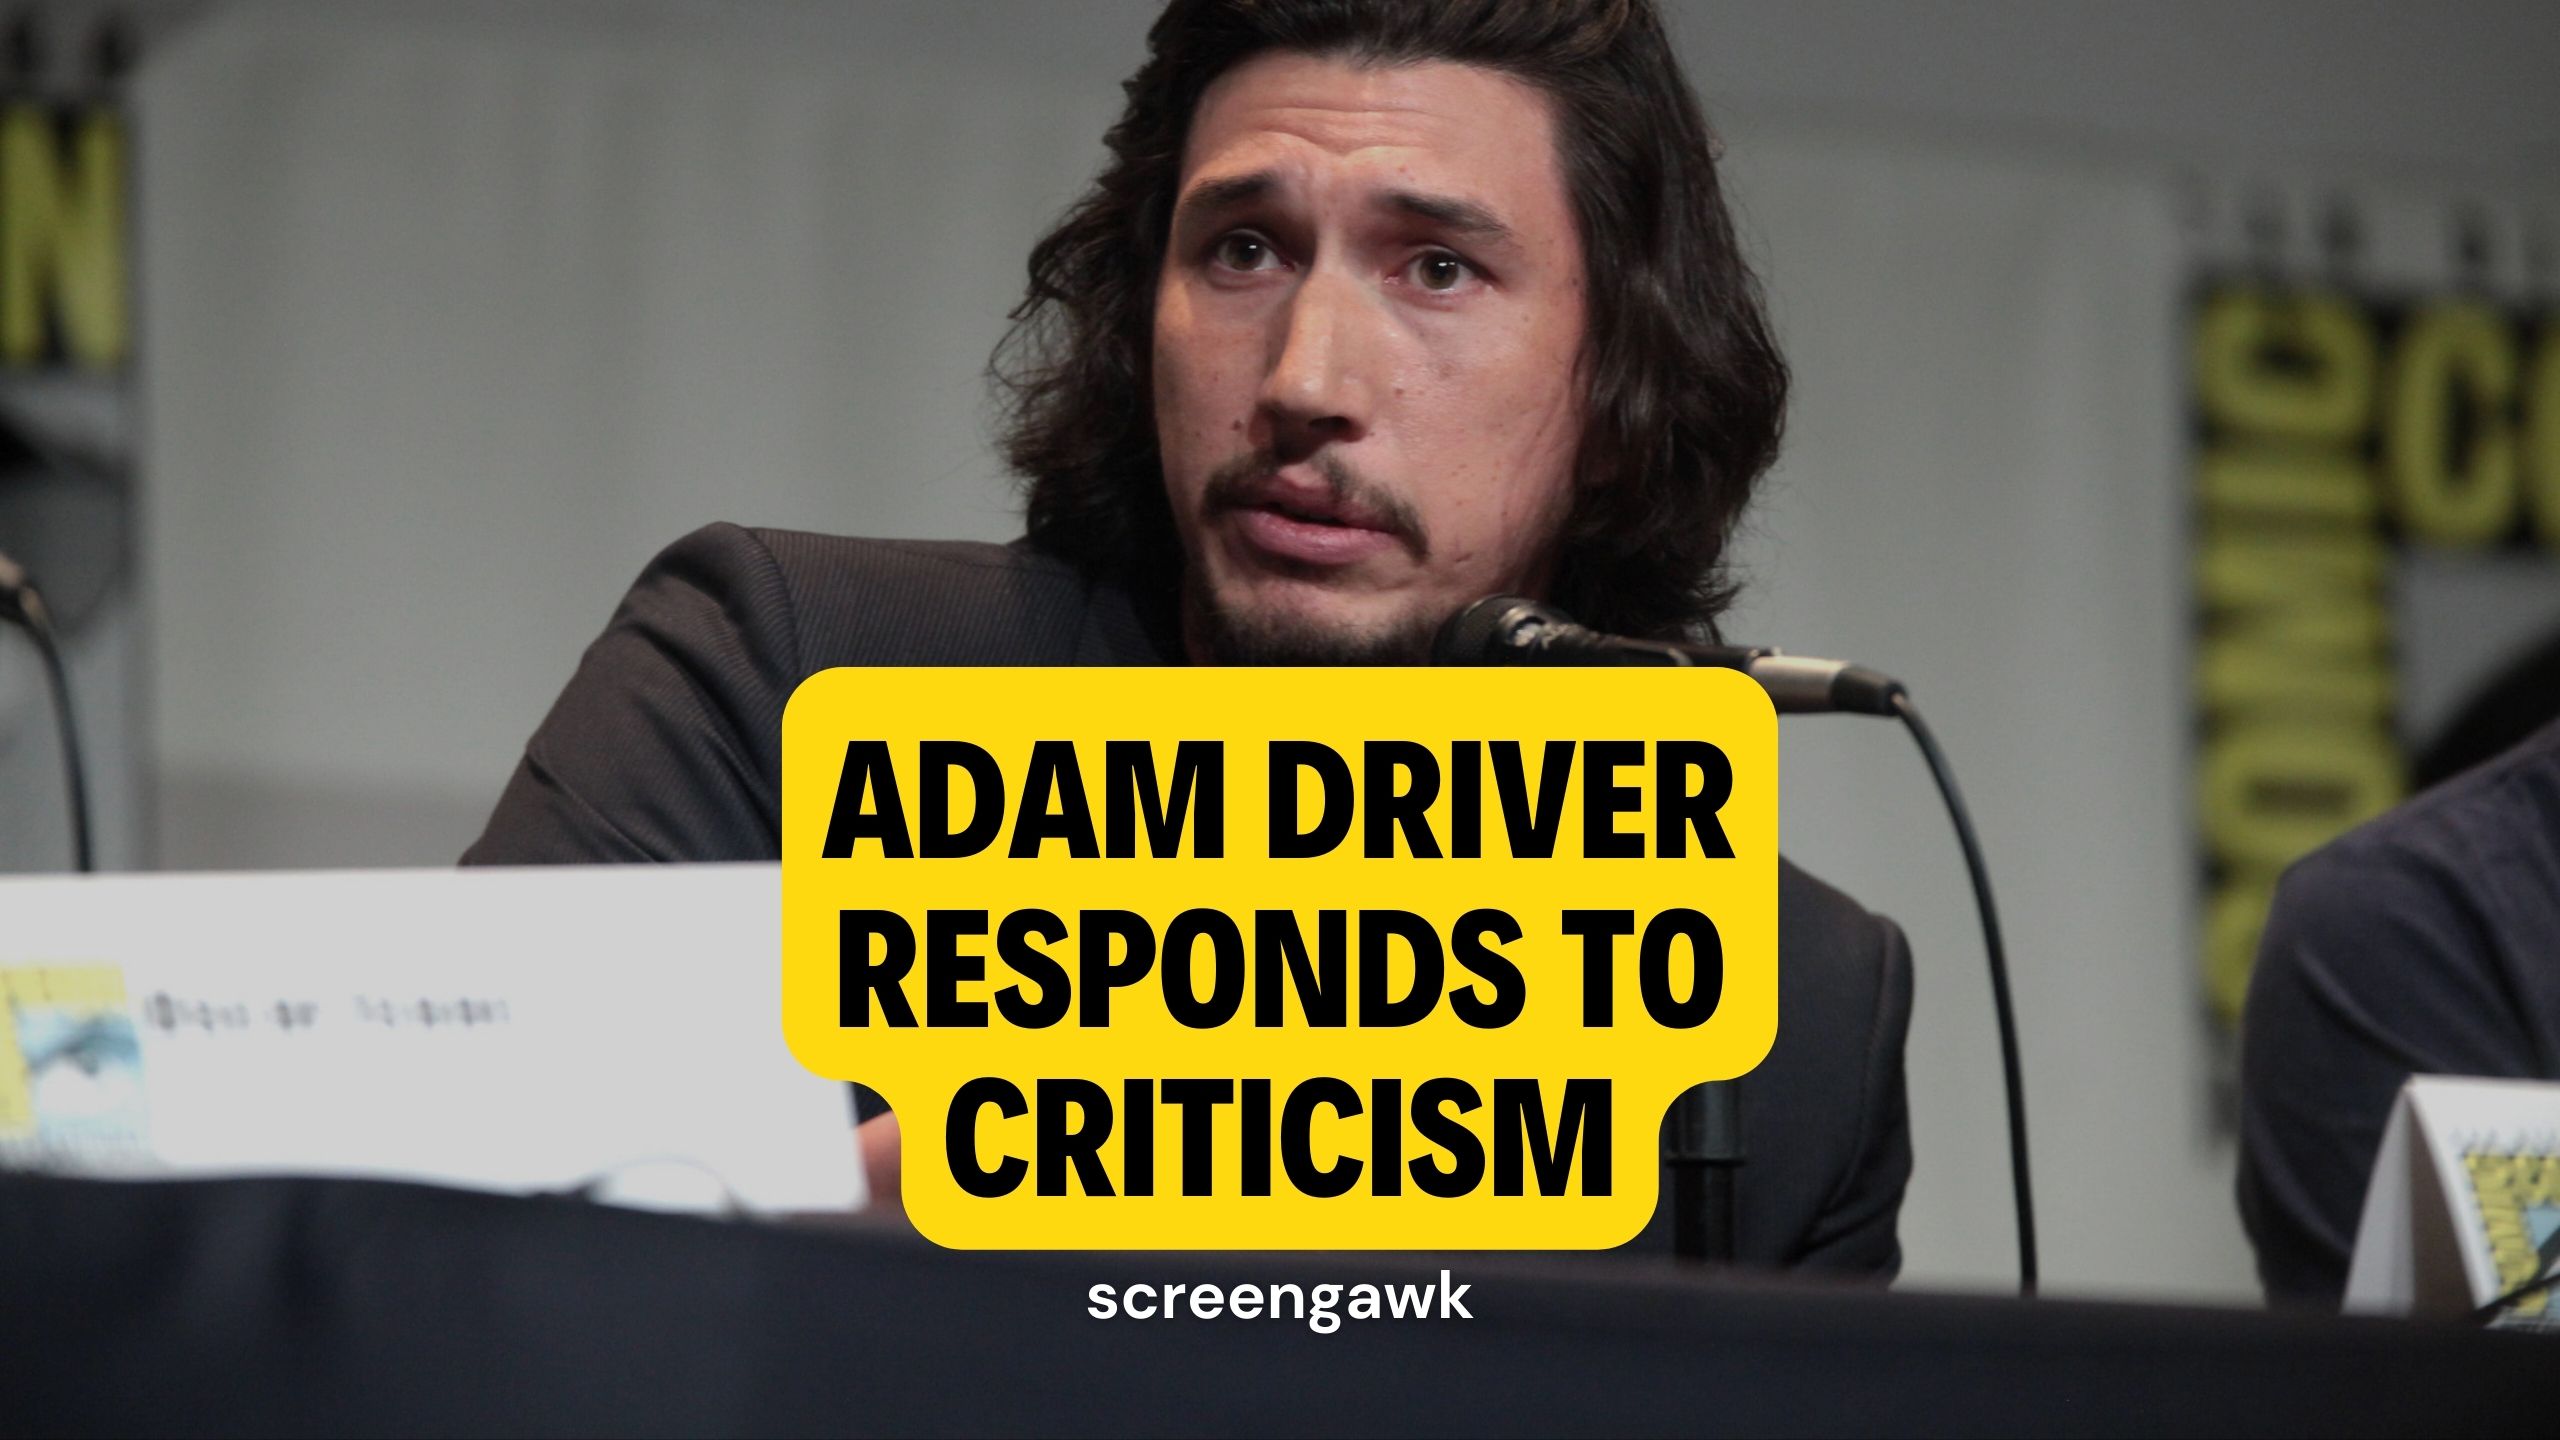 Adam Driver Gracefully Responses to Criticism That “He Doesn’t Look Like a Typical Movie Star”